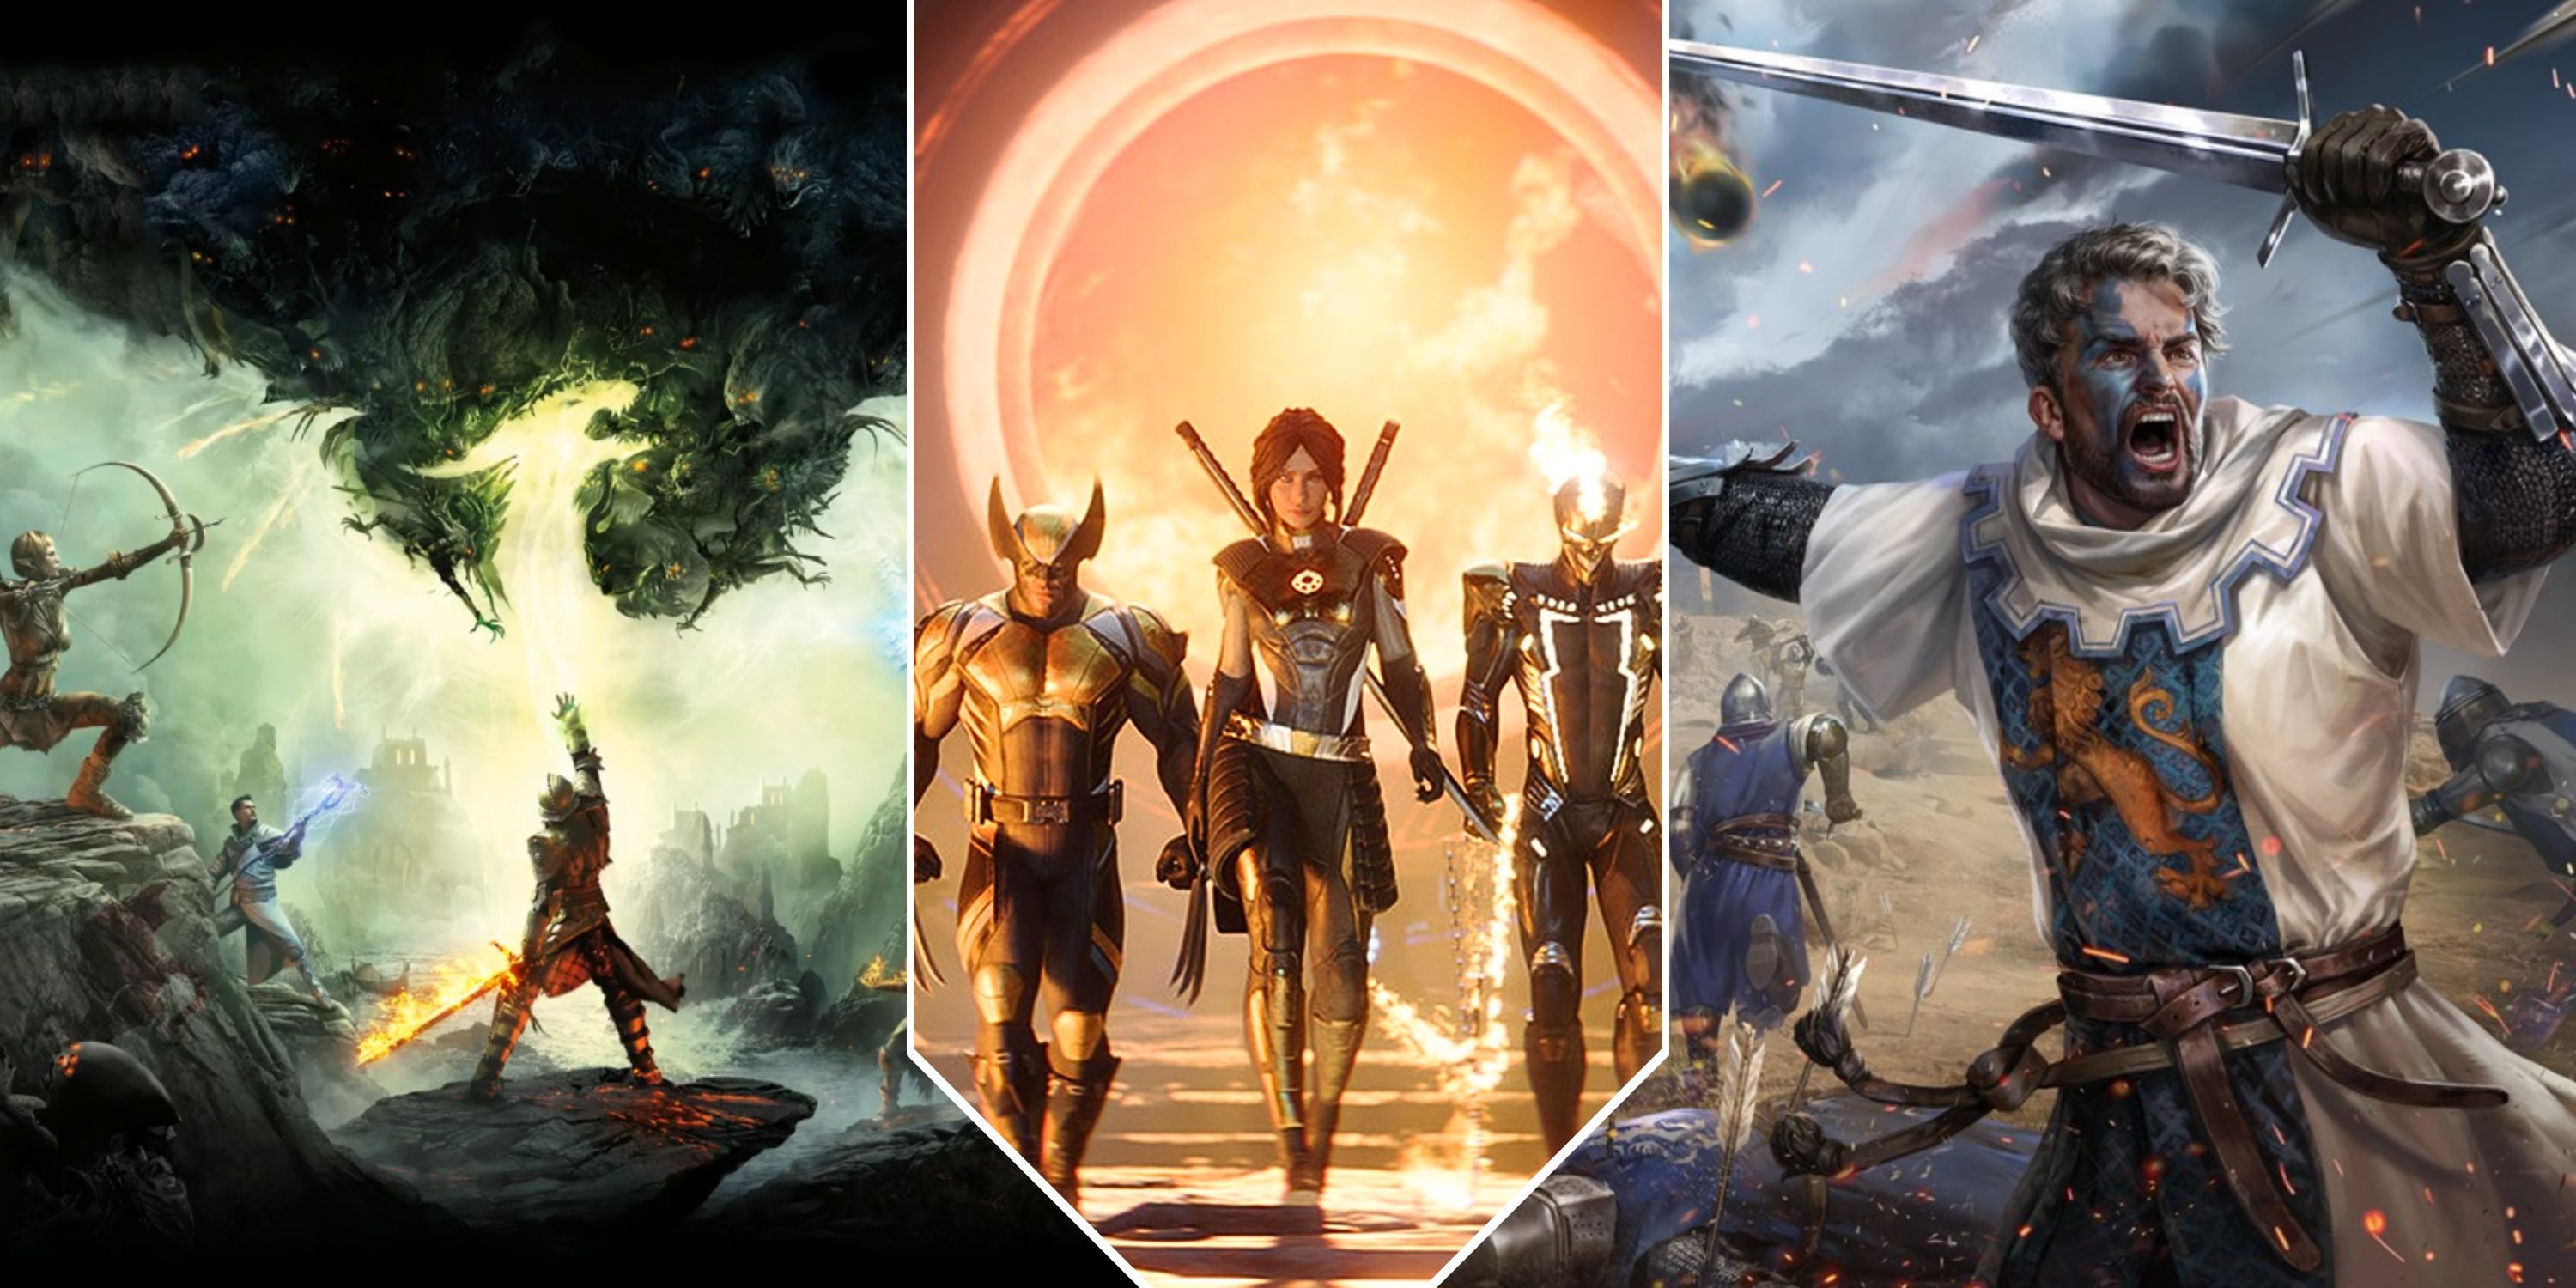 Collage image featuring Dragon Age Inquisition, Midnight Suns, and Chivalry 2 cover art